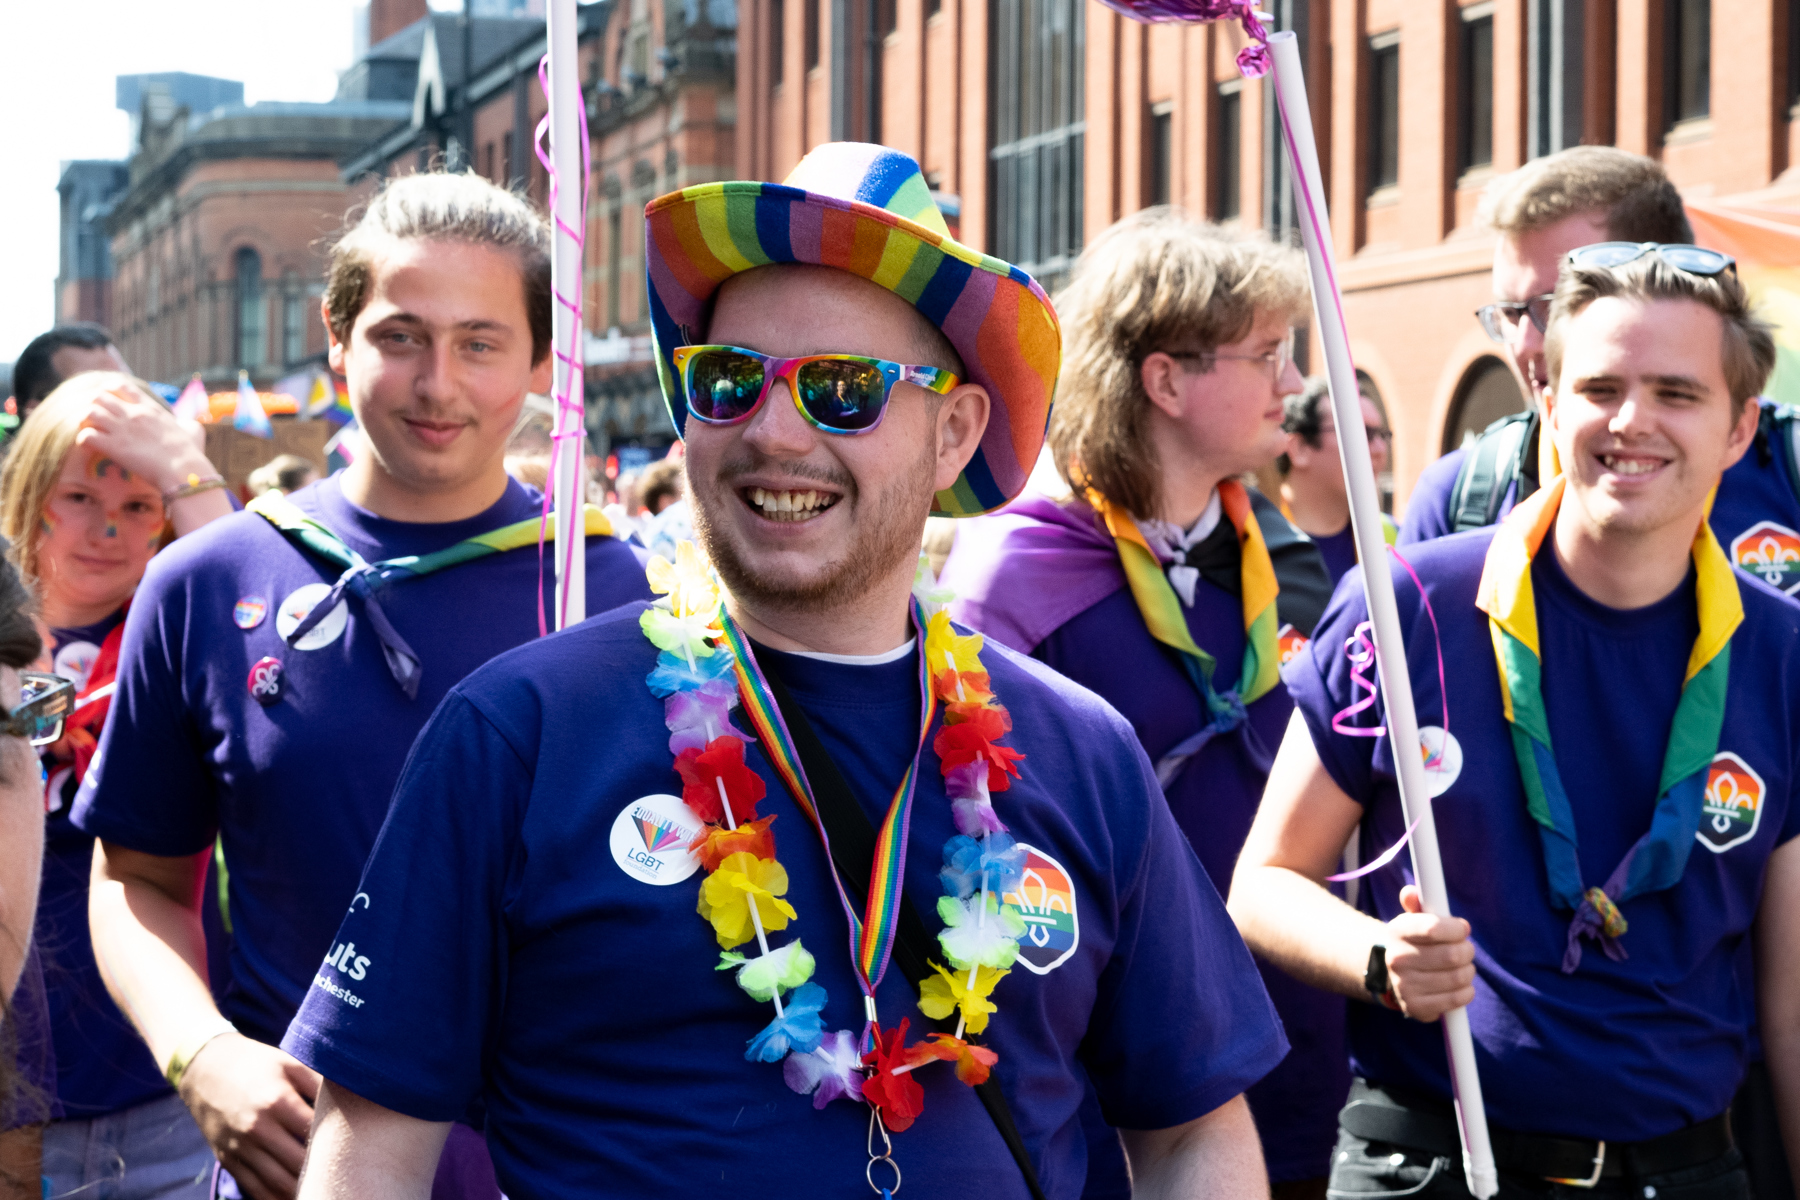 A Scout in a Pride parade wearing a rainbow necker, rainbow hat, rainbow sunglasses and Scout Pride t-shirt. They are smiling.